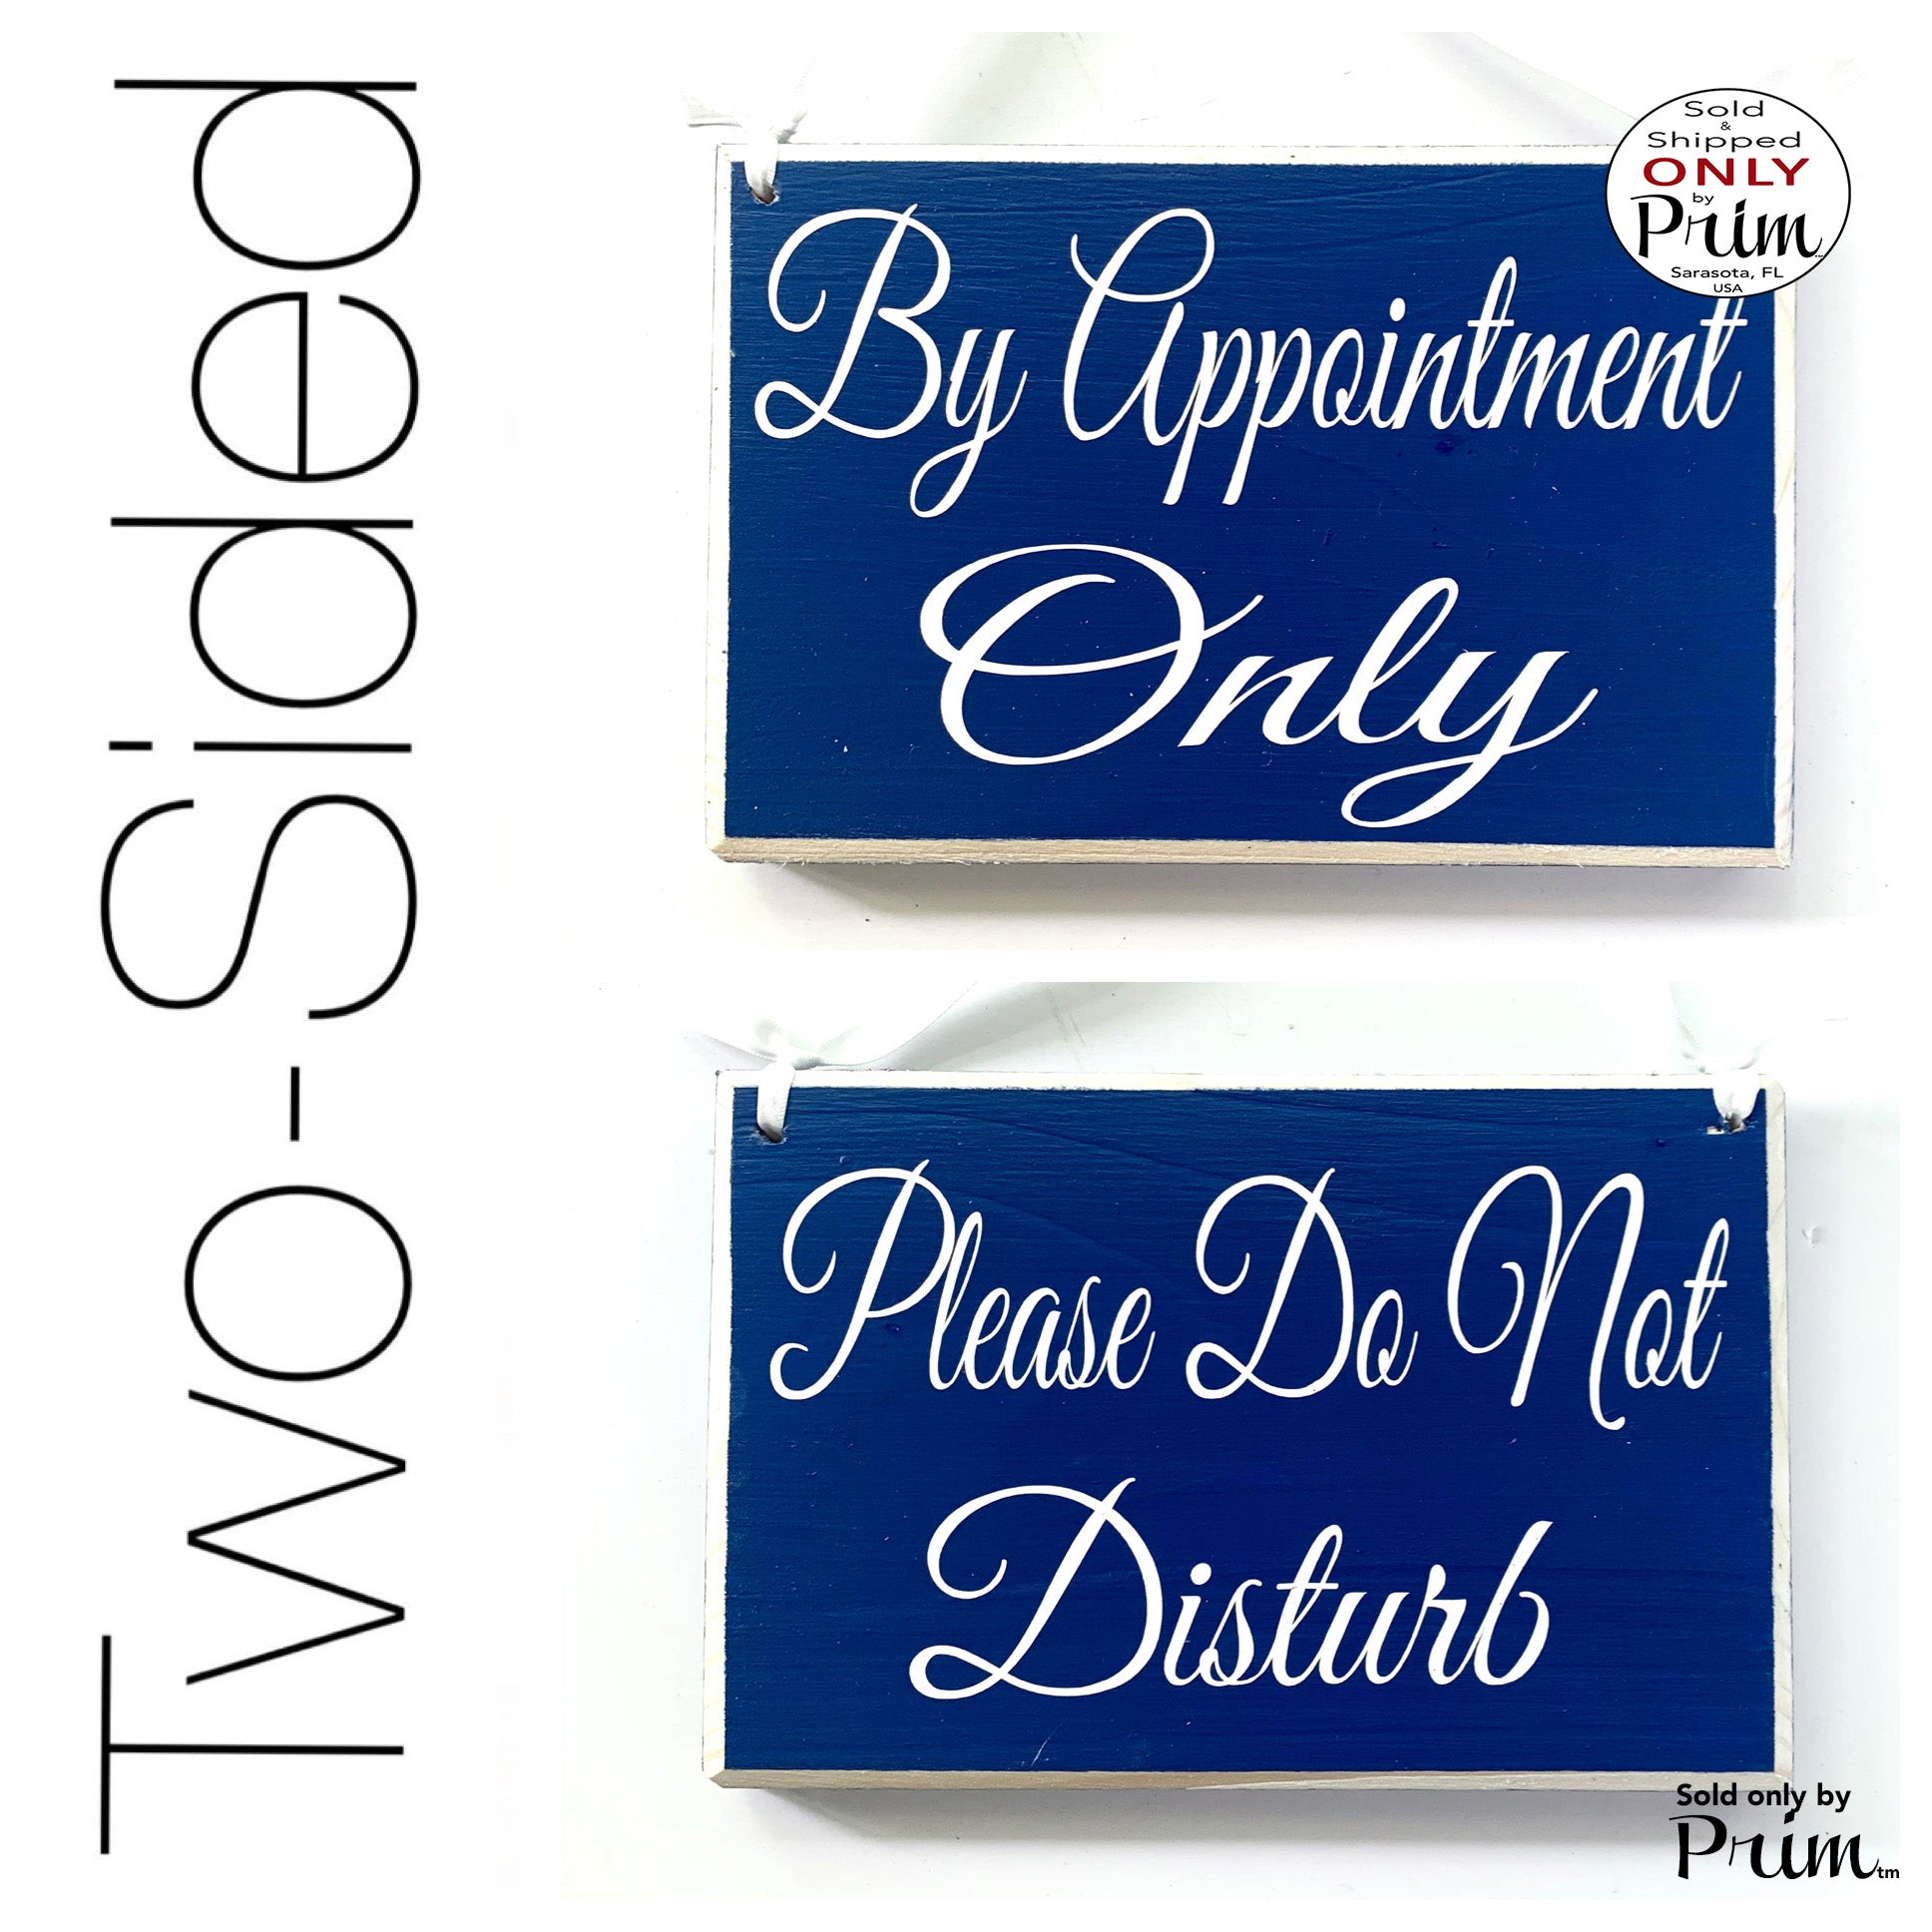 Designs by Prim 8x6 By Appointment Only Please Do Not Disturb Custom Wood Sign | With a Patient Client Doctor Nurse Therapy Office Progress Session Plaque